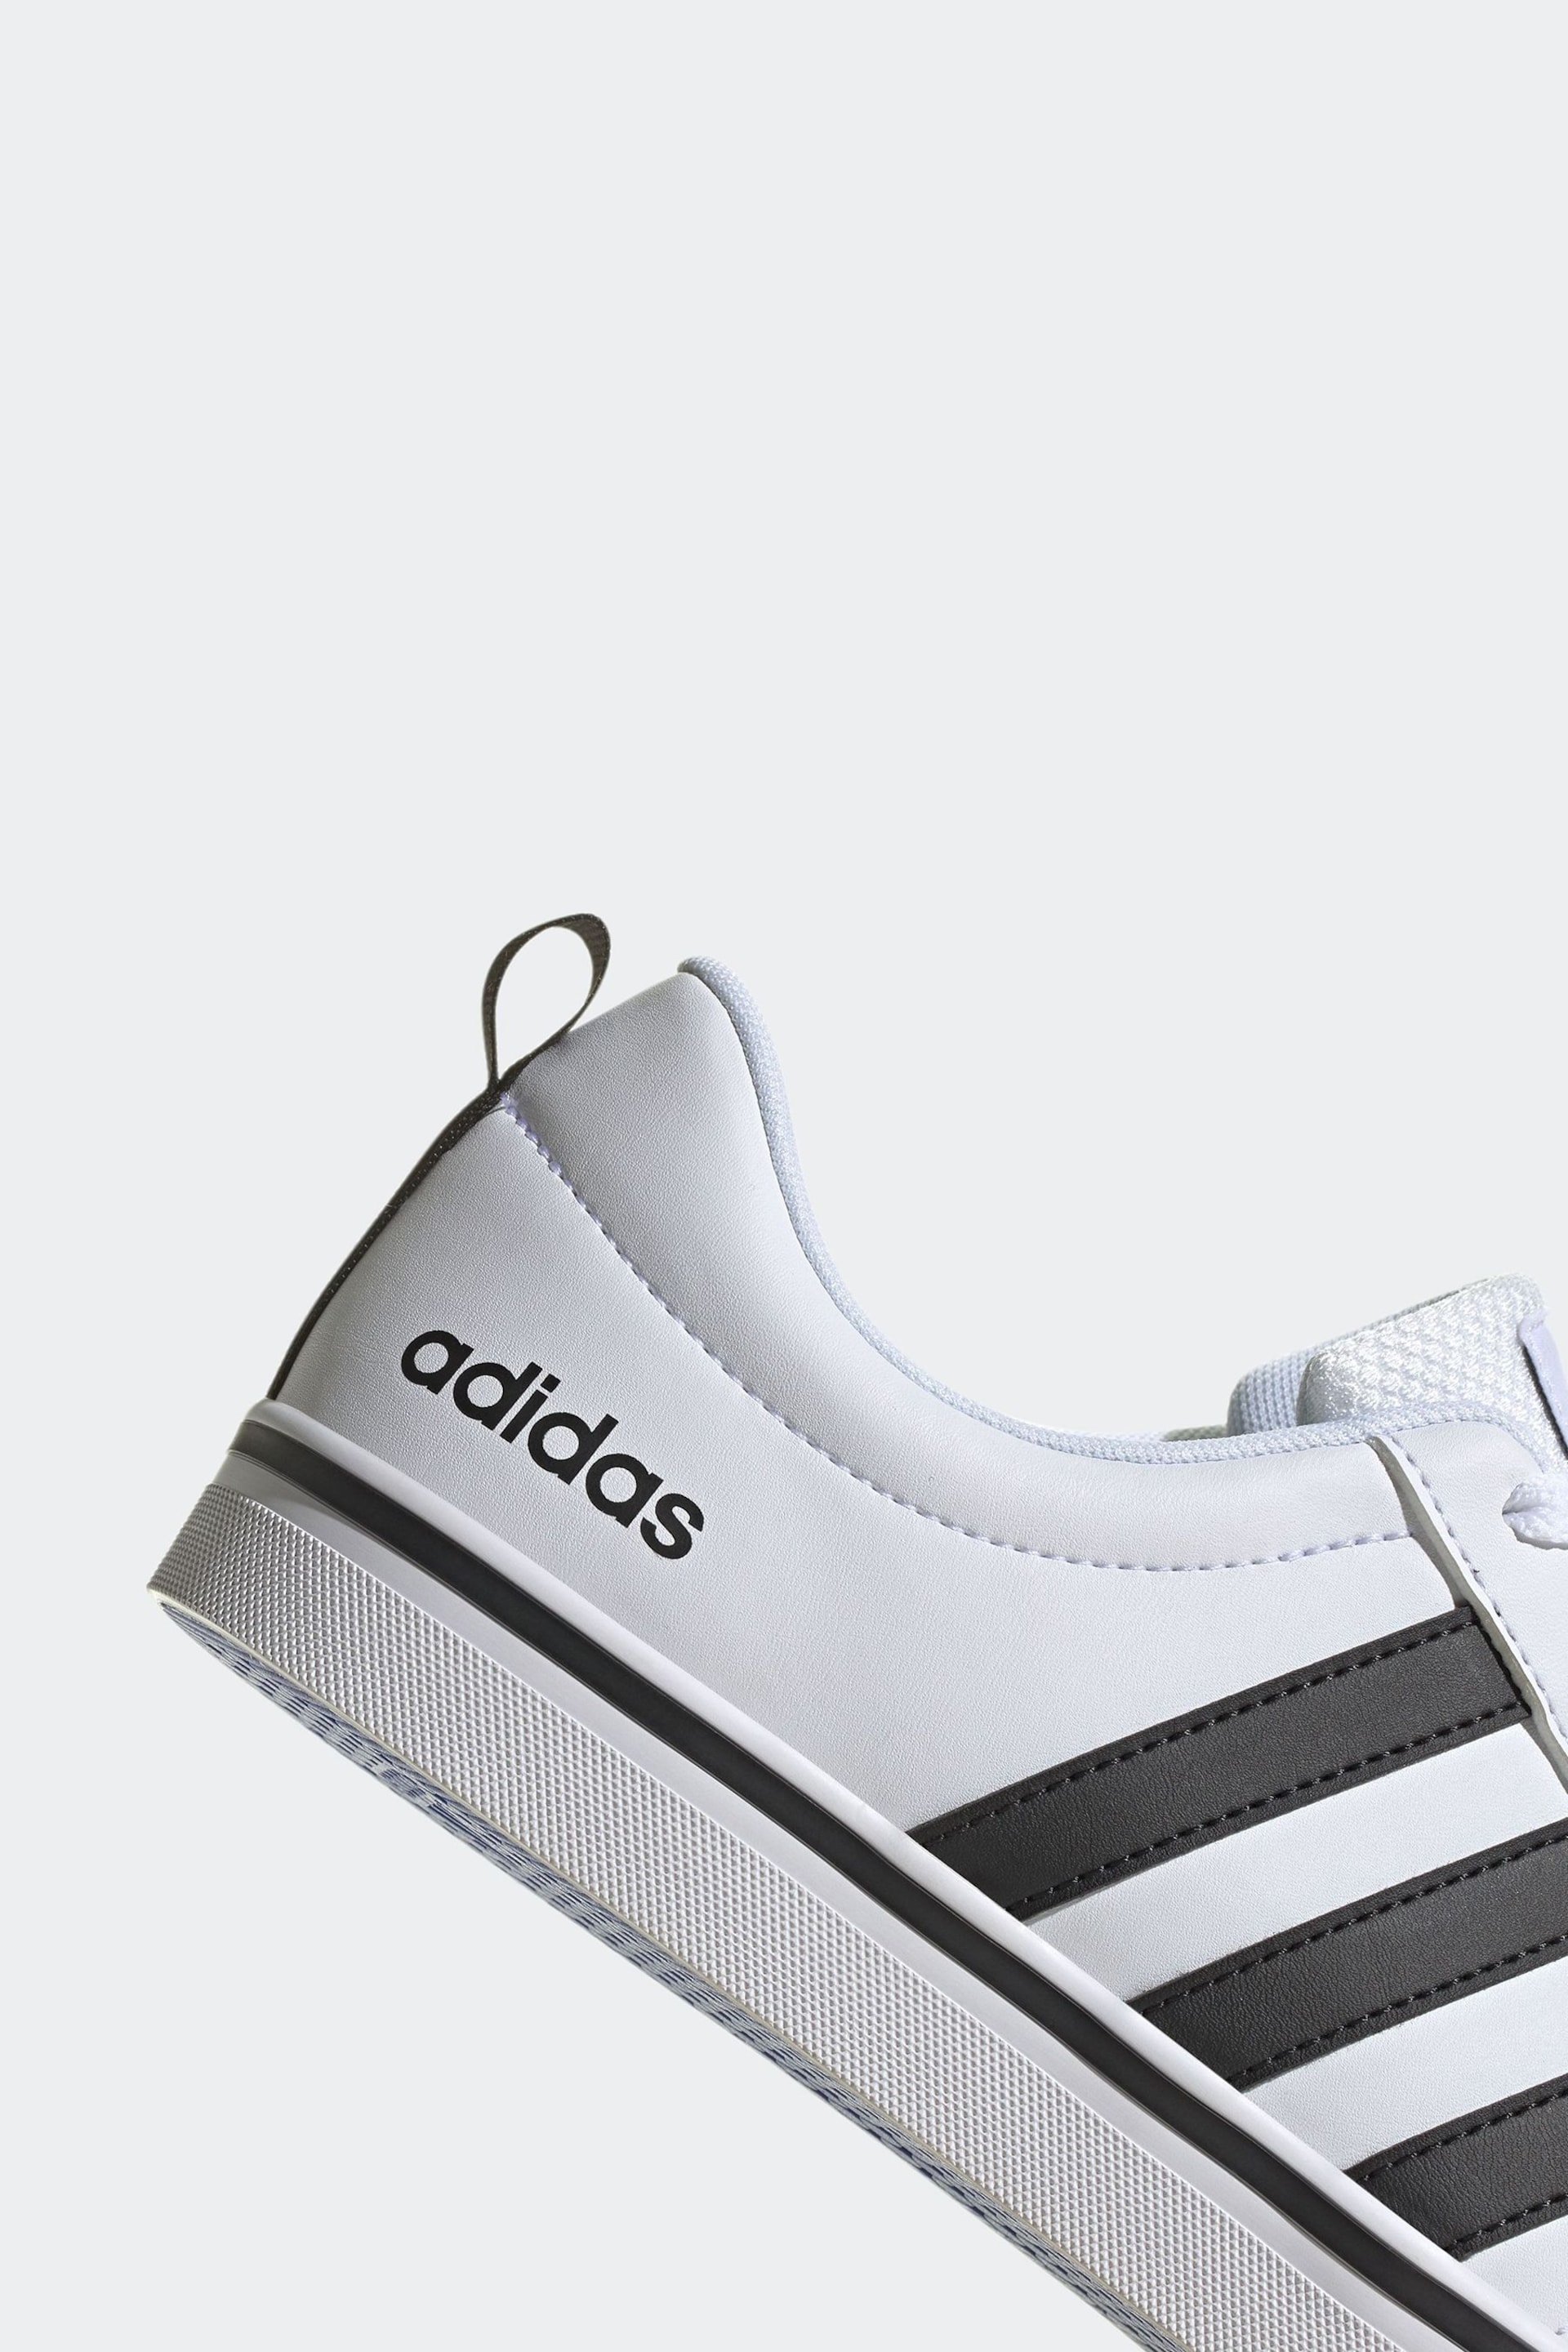 adidas White/Black Sportswear VS Pace Trainers - Image 8 of 9